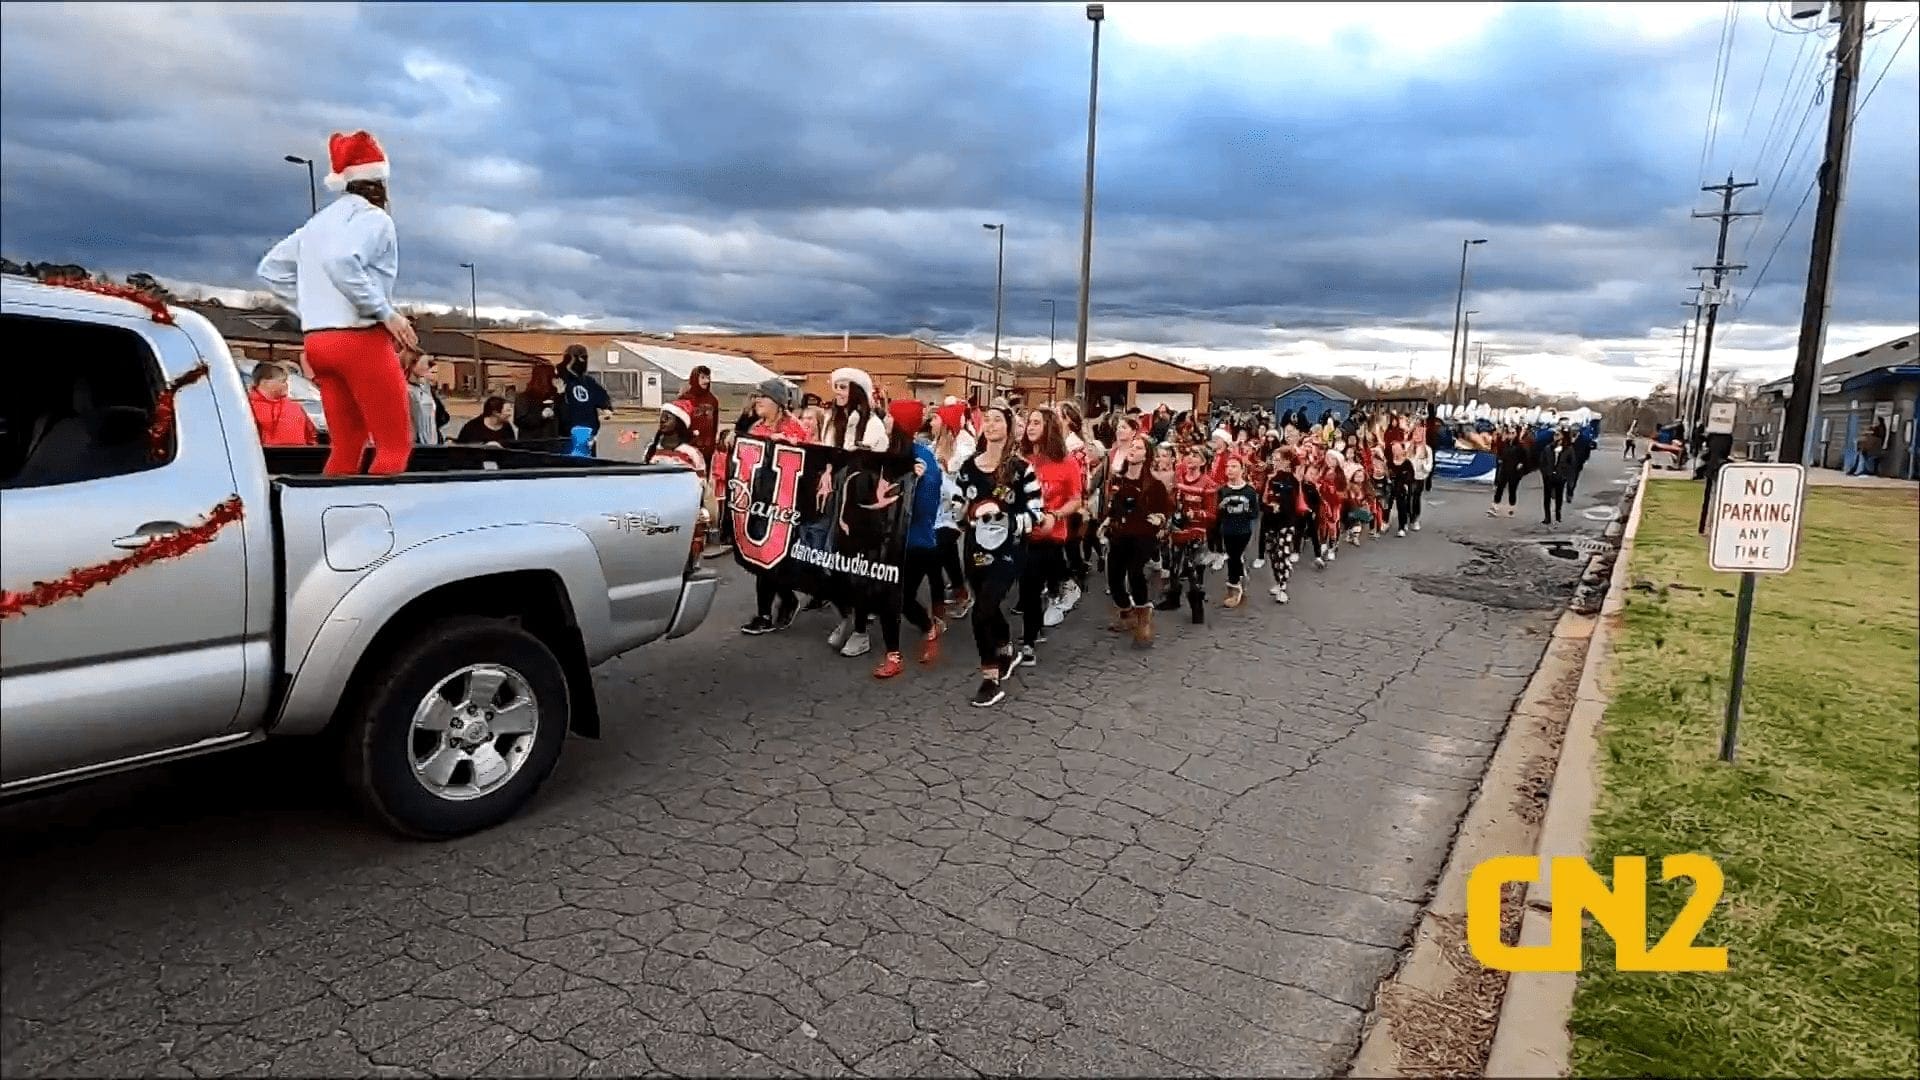 Annual Indian Land Christmas Parade Nothing Short Of Magical CN2 News